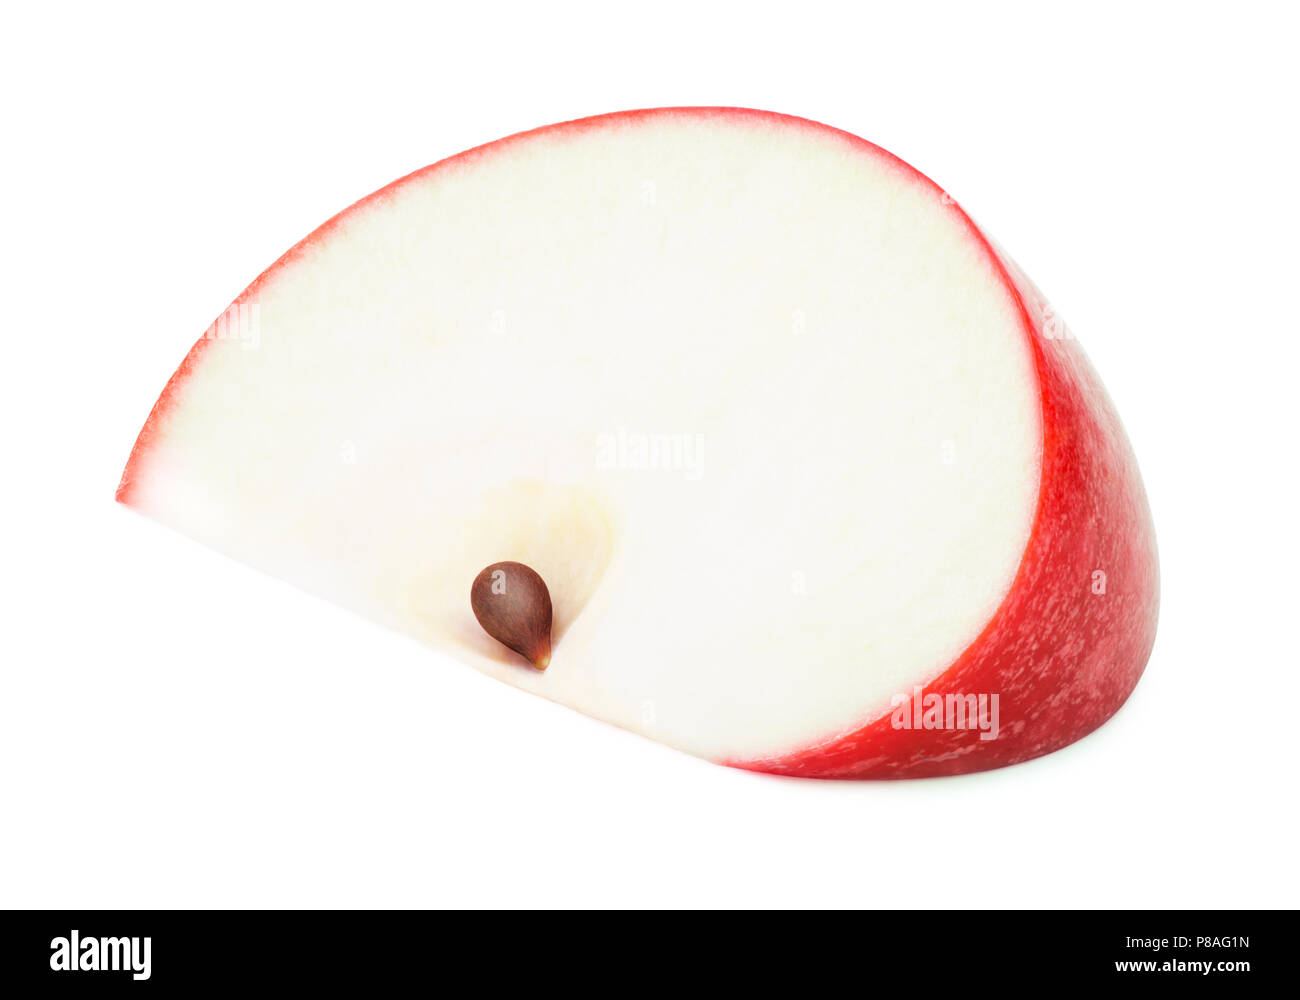 Fresh red apple slice isolated on white Banque D'Images